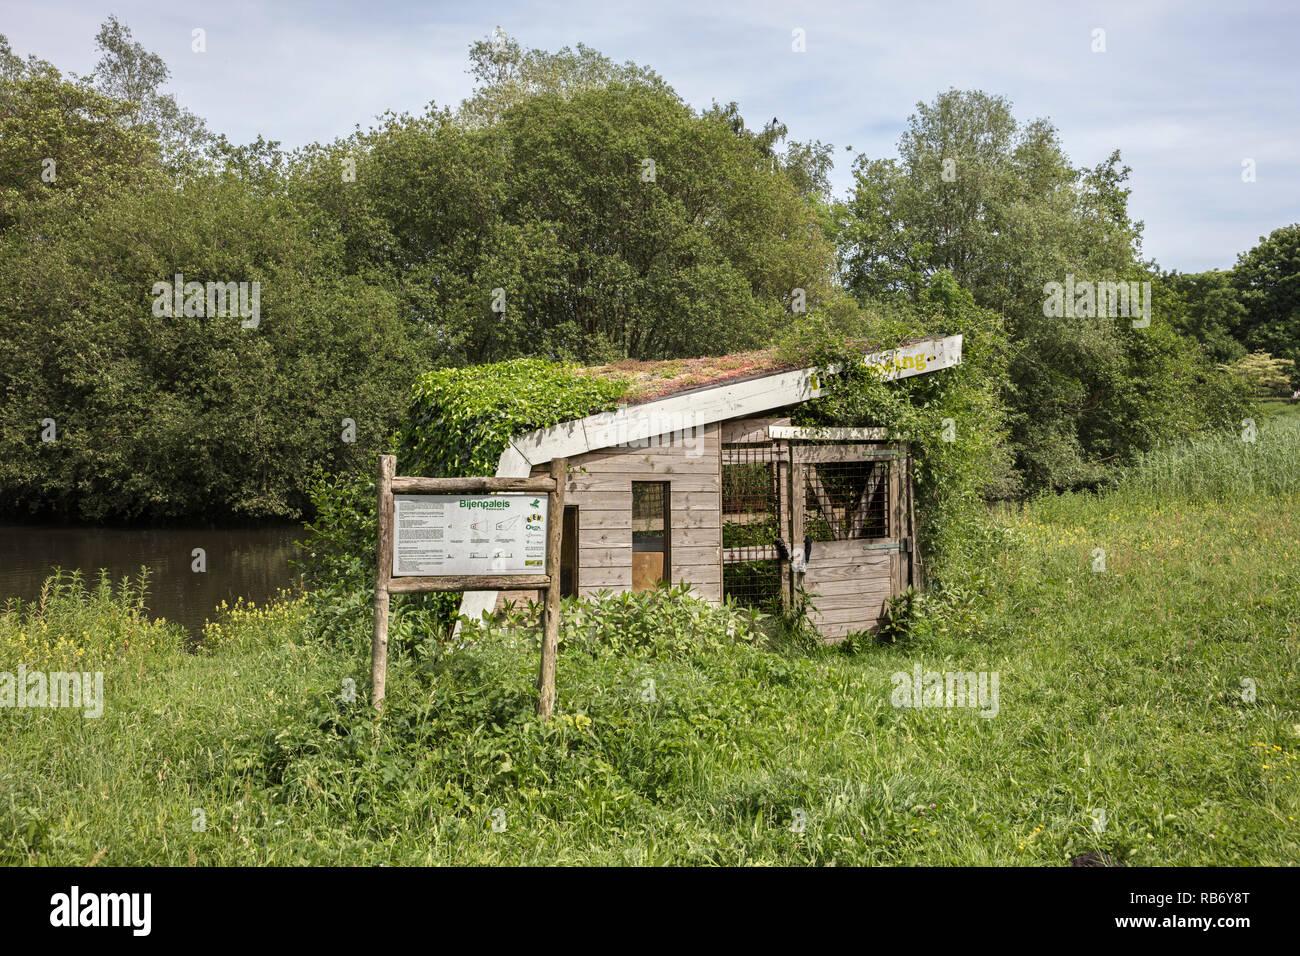 The Netherlands, Amsterdam. Westerpark. Beehives. Stock Photo